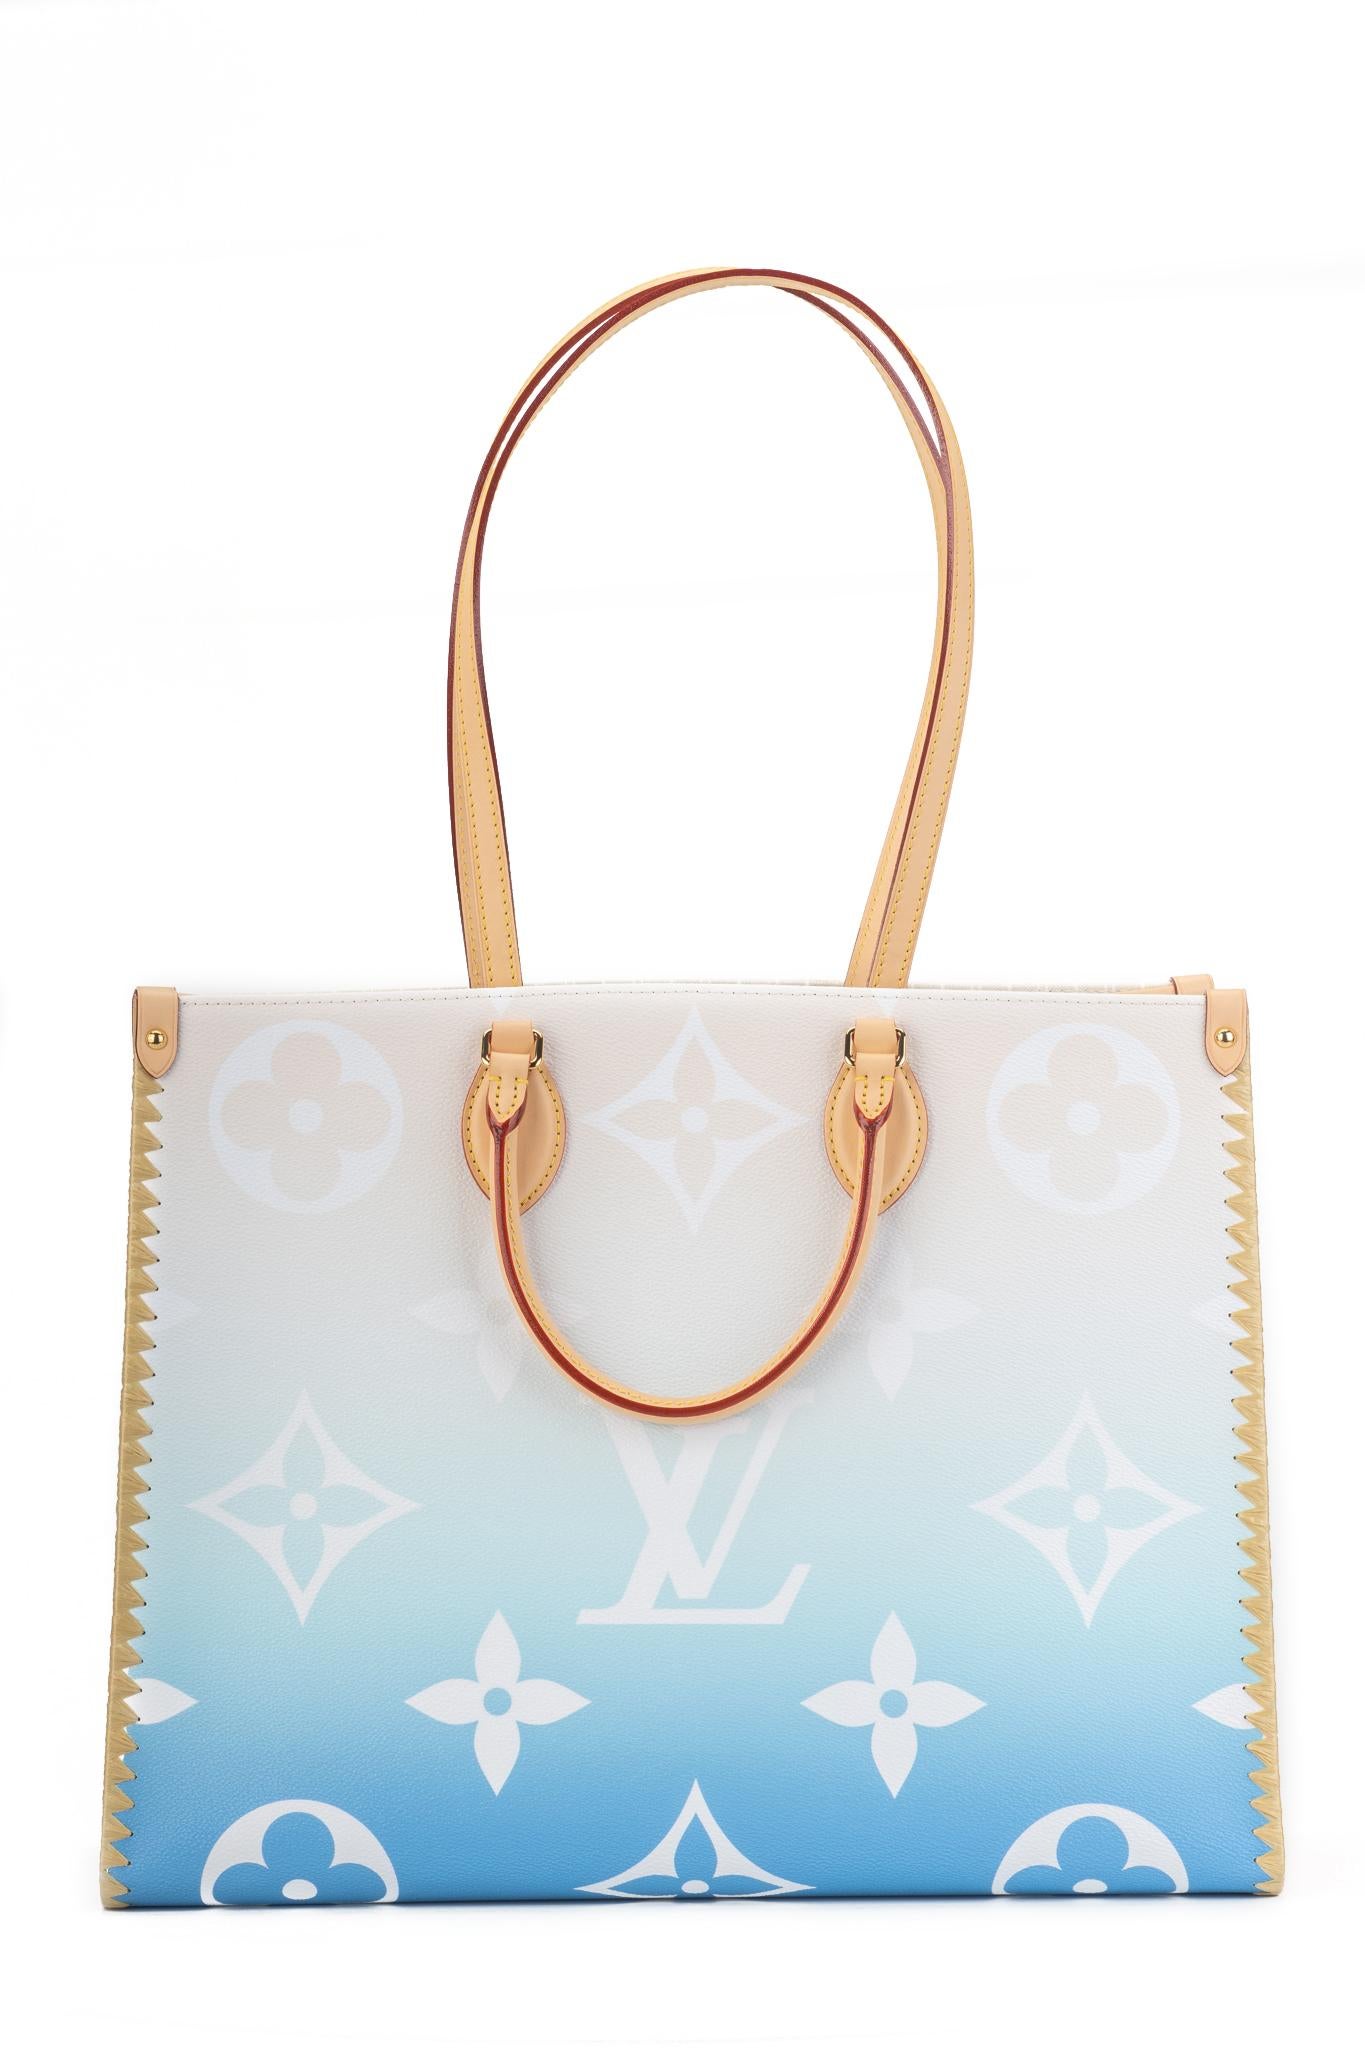 Louis Vuitton 2021 Summer Collection - 8 For Sale on 1stDibs